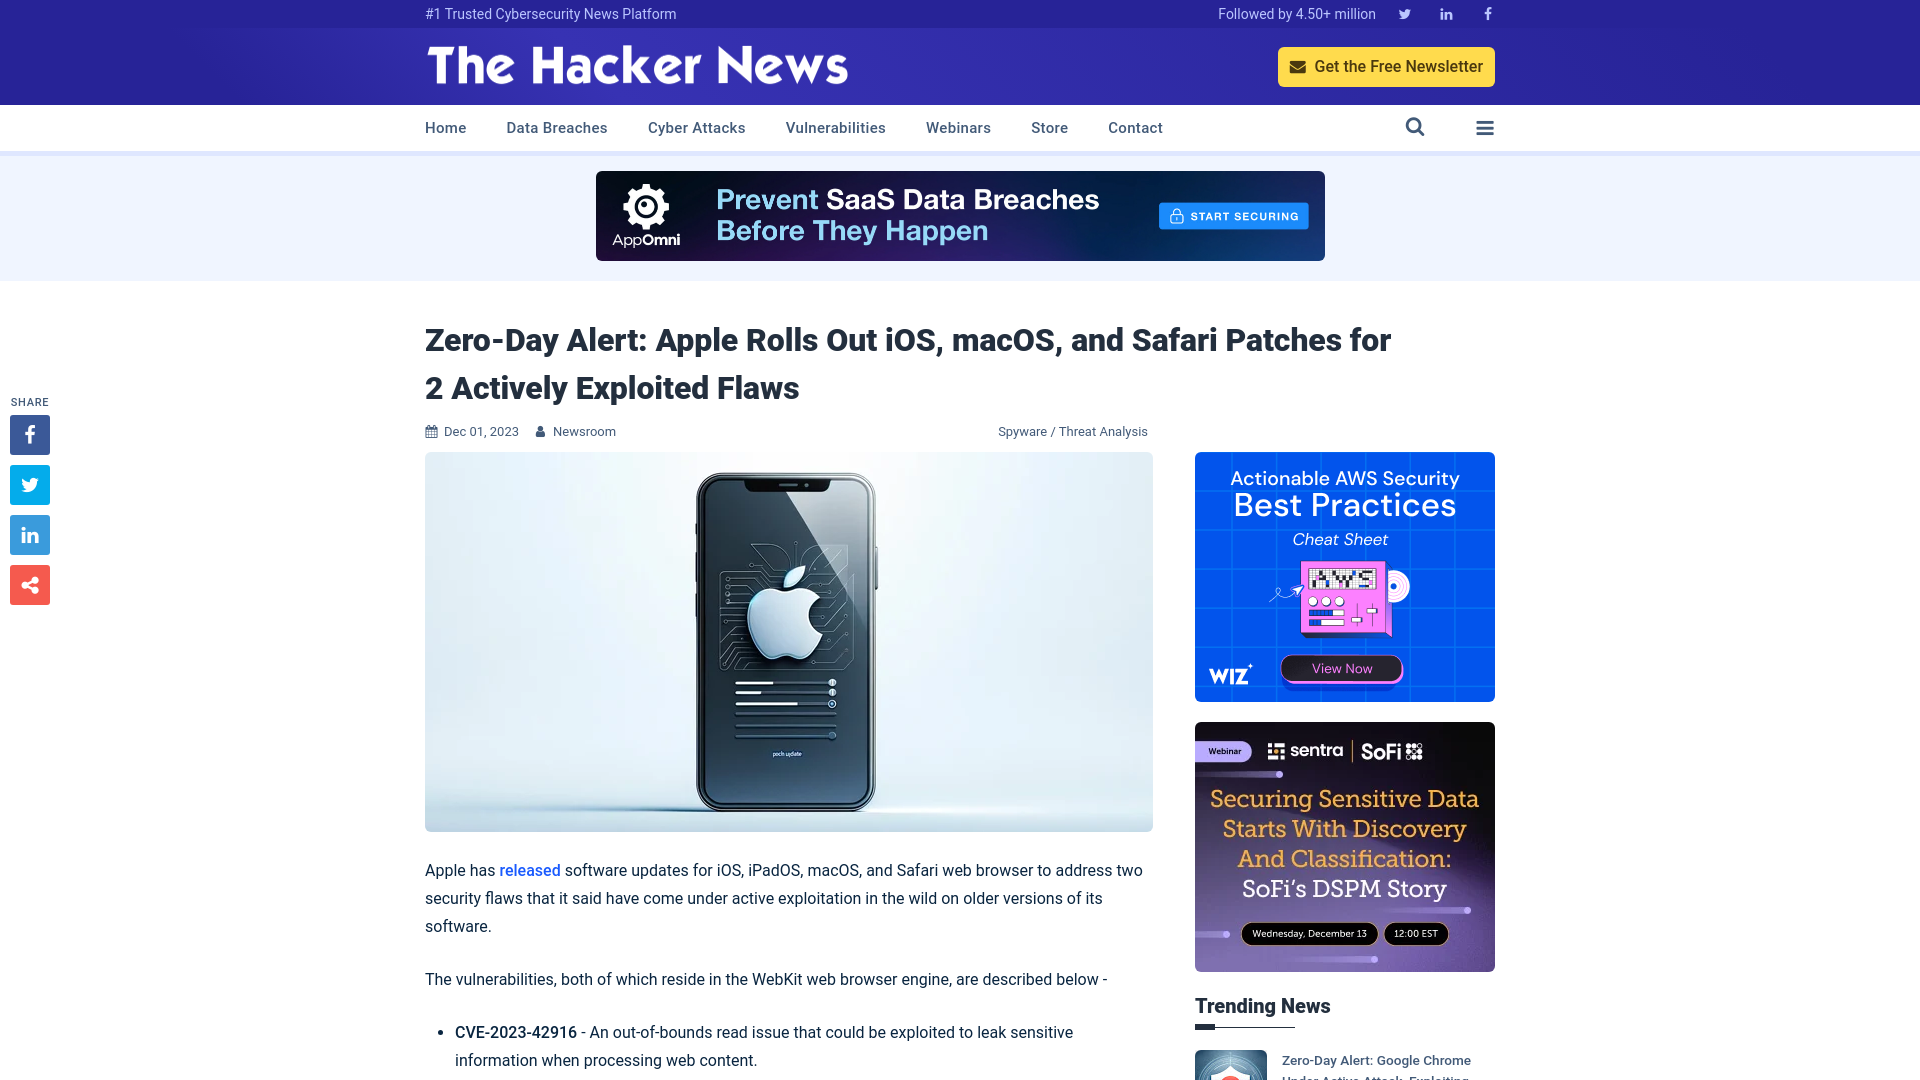 Zero-Day Alert: Apple Rolls Out iOS, macOS, and Safari Patches for 2 Actively Exploited Flaws